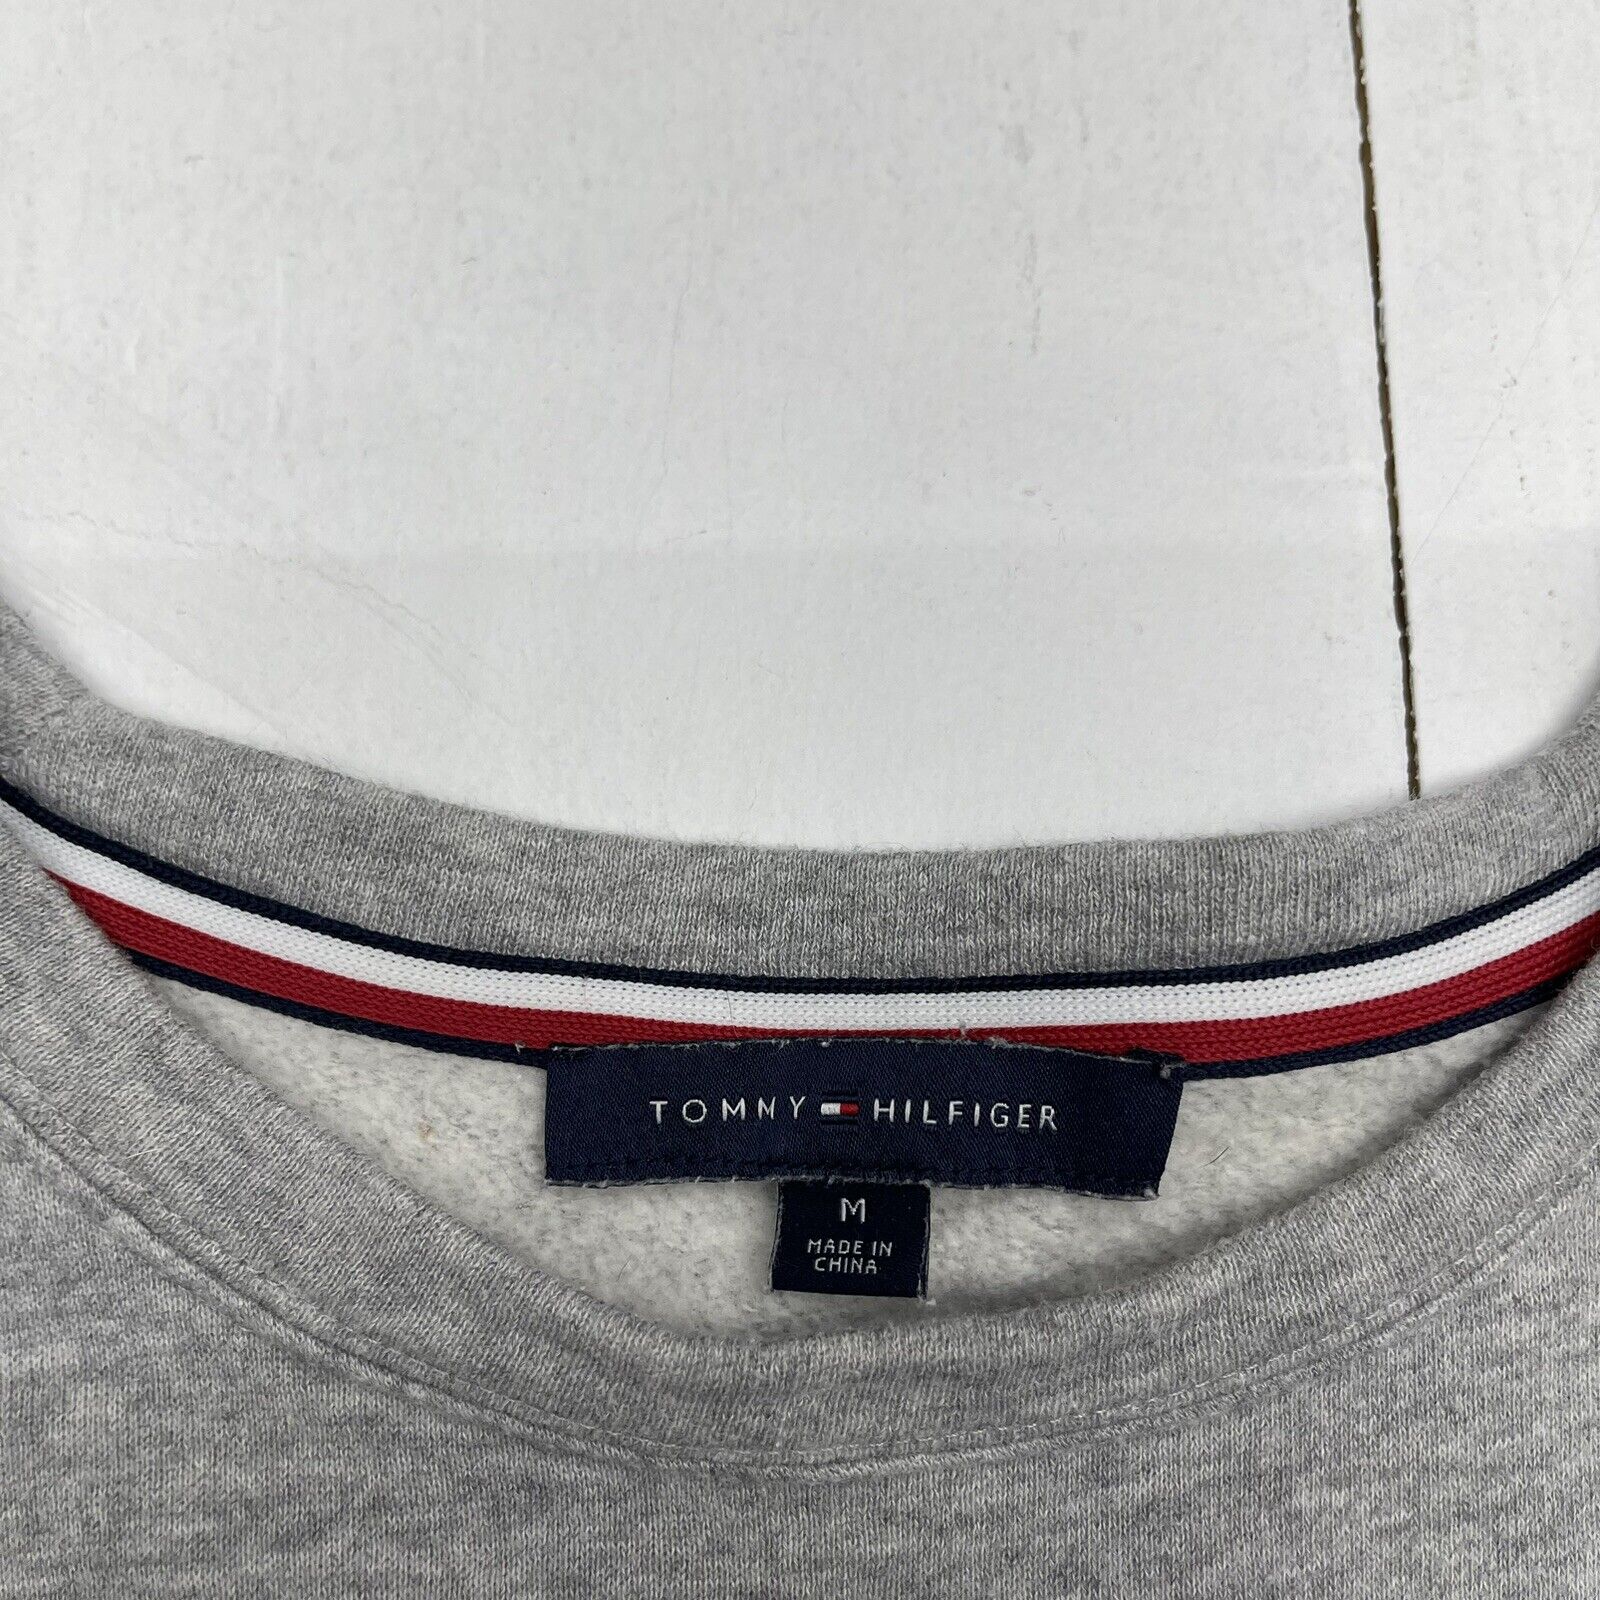 Tommy Hilfiger Gray Graphic Spell Out Logo Sweatshirt Women's Med - beyond exchange